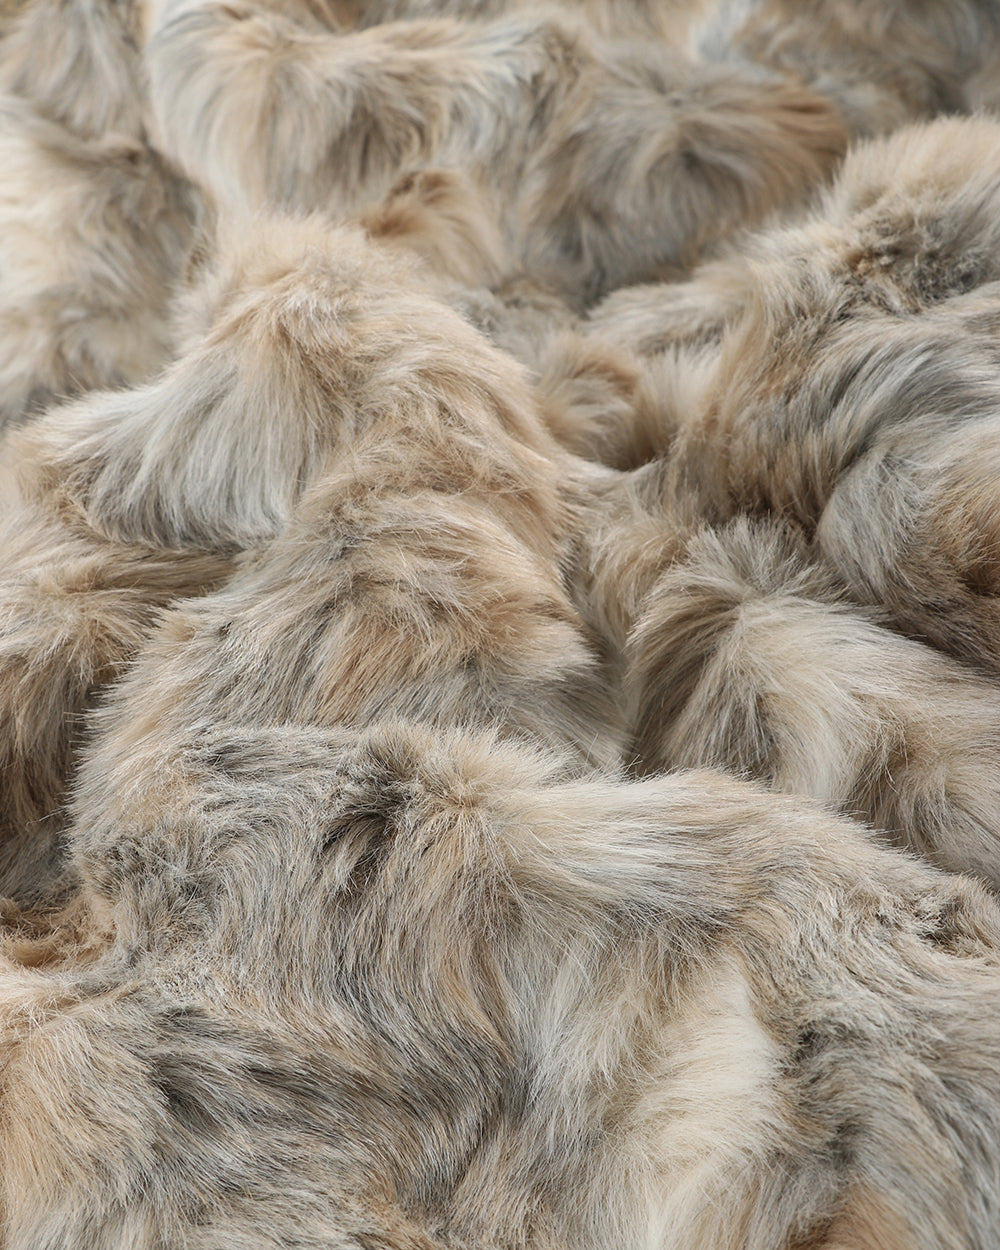 Heirloom Vintage Squirrel Grey Throw Rug Blanket in Faux Fur is available from Make Your House A Home Premium Stockist. Furniture Store Bendigo, Victoria. Australia Wide Delivery.